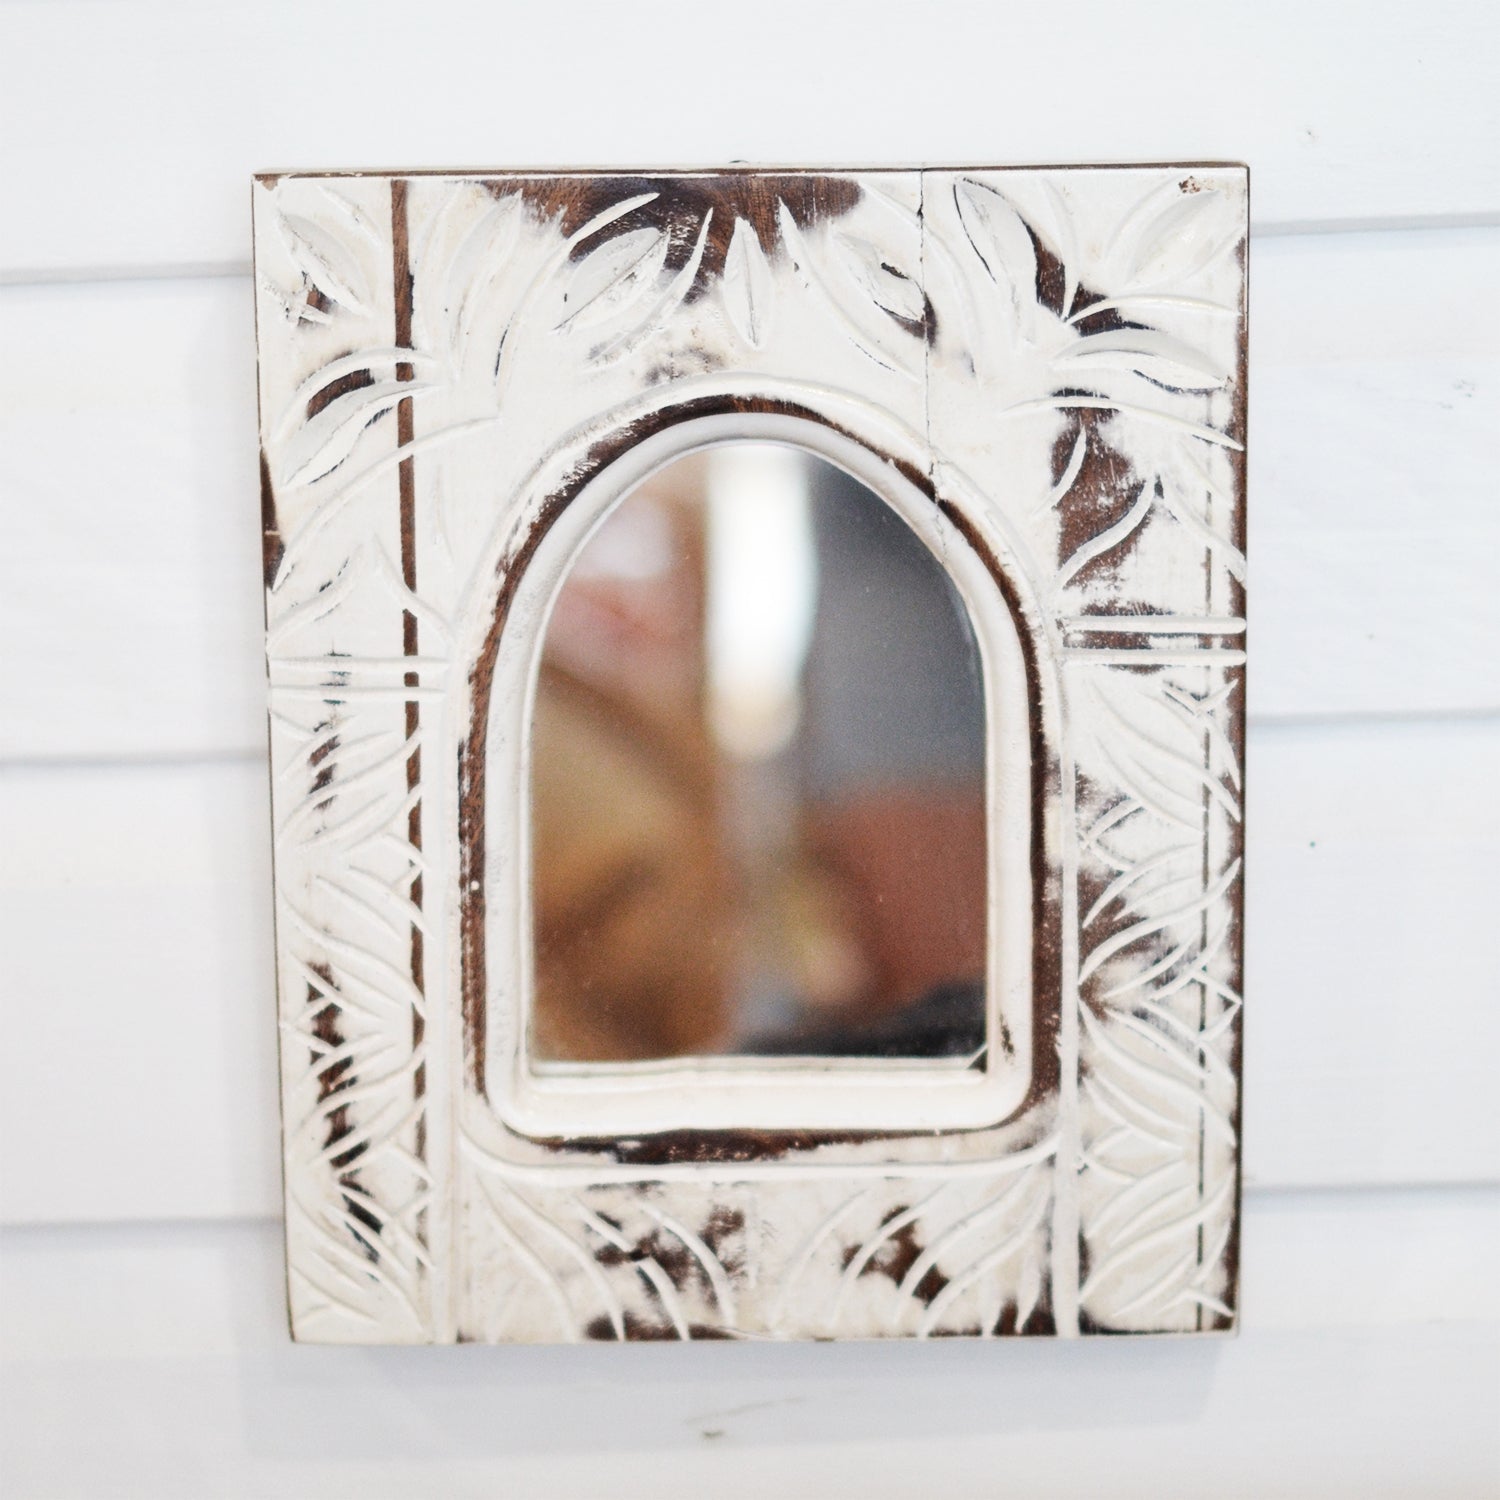 Indian Timber Arch Mirrors - Assorted Designs